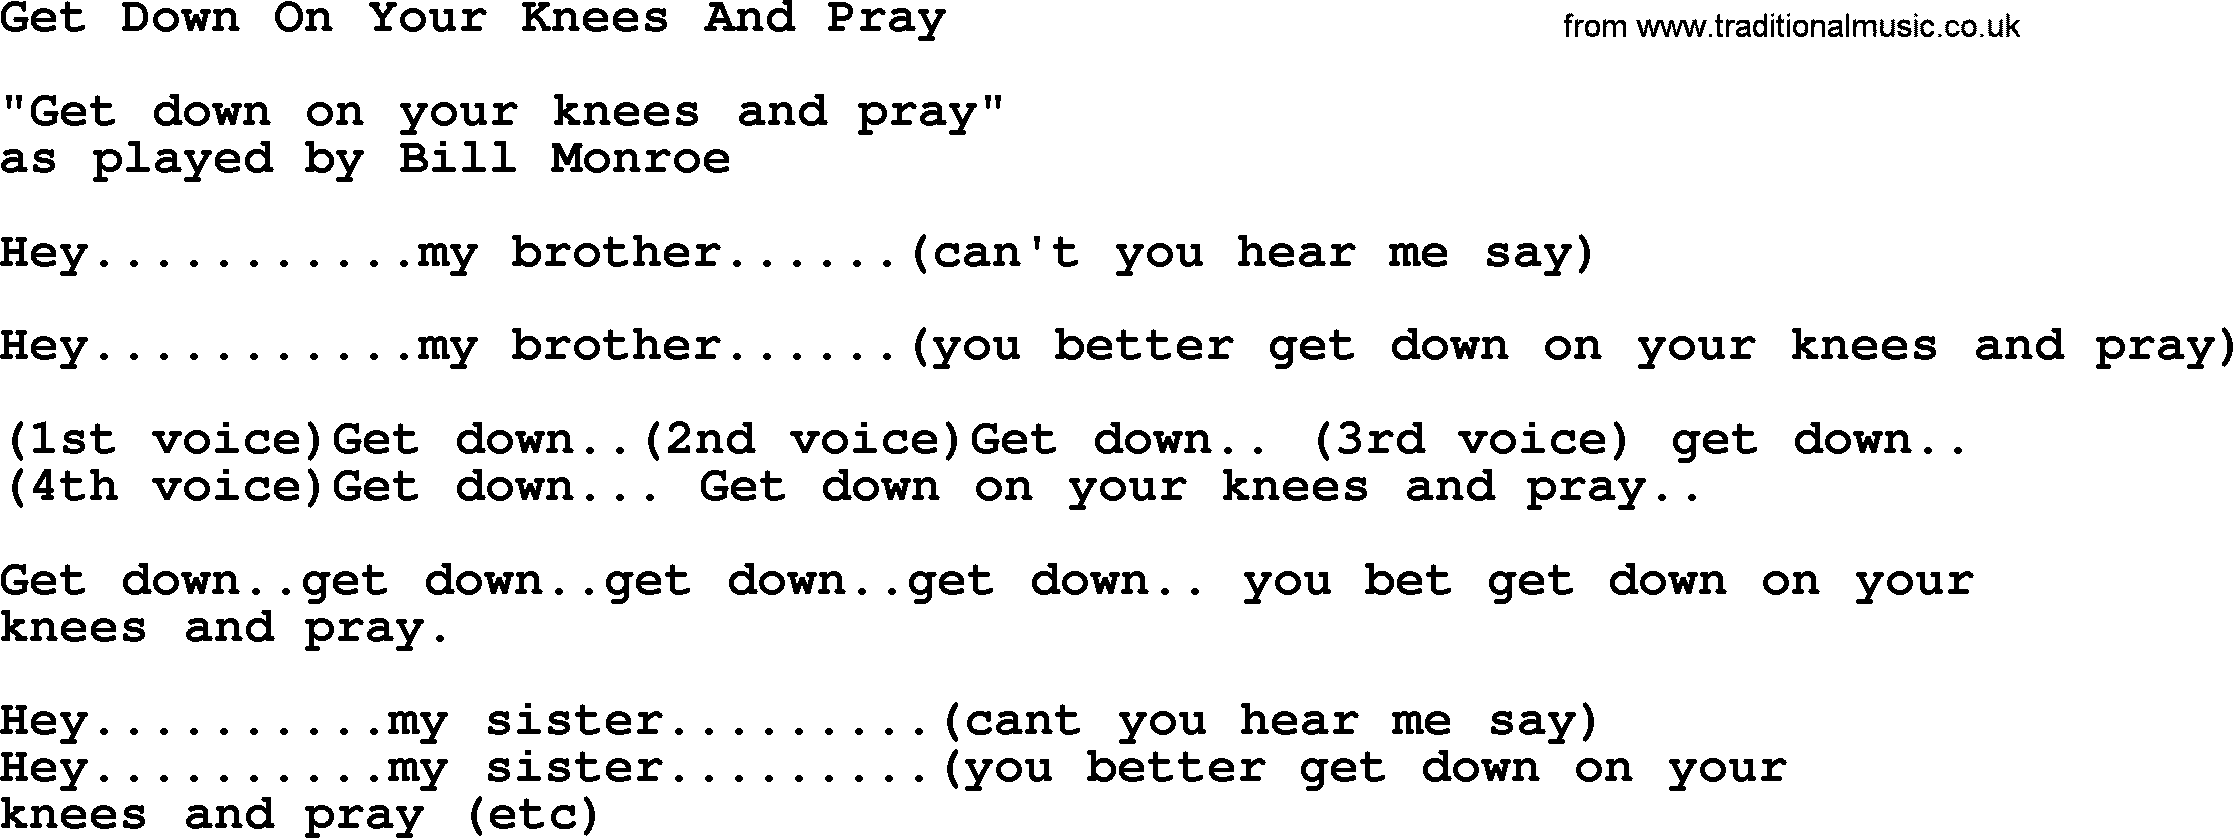 Bluegrass song: Get Down On Your Knees And Pray 1, lyrics and chords